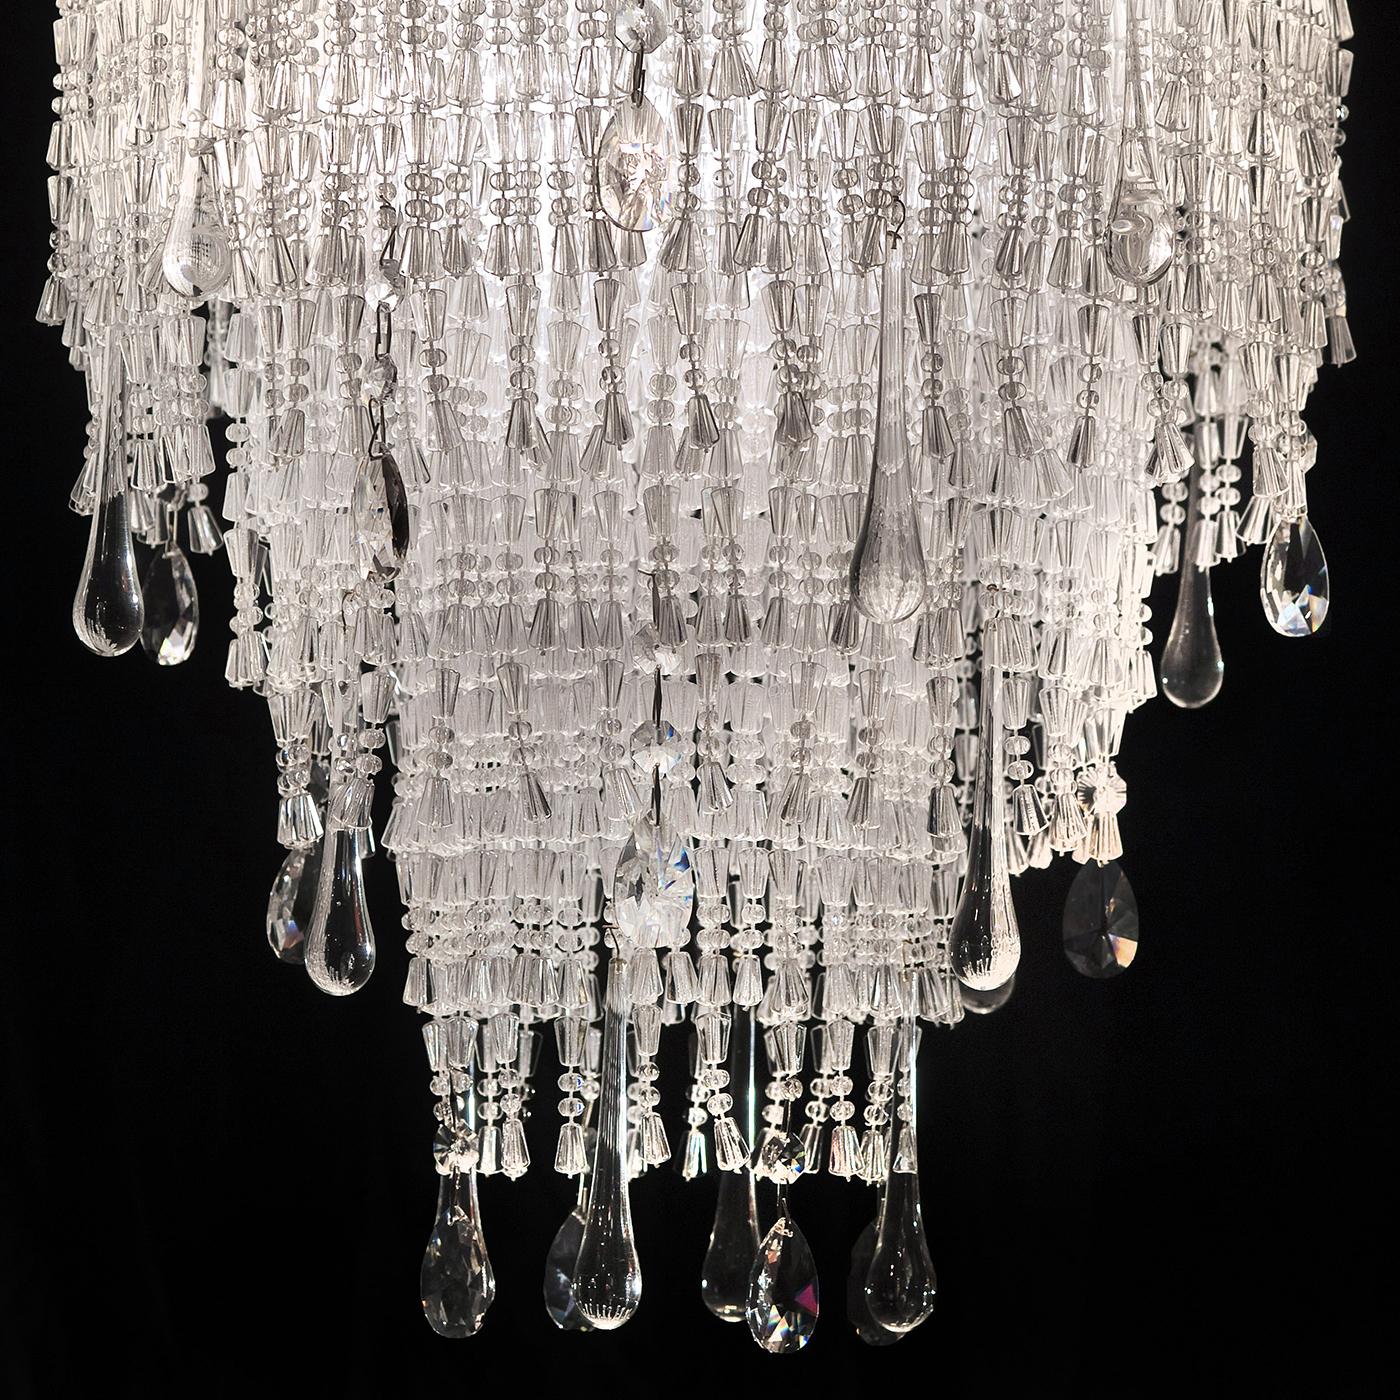 Densely embellished with precious crystal elements, this suspension lamp boasts a remarkable tiered silhouette evoking a cascade. Entirely handcrafted, it is mainly composed of clear, irregularly shaped beads in methacrylate hanging down in straight